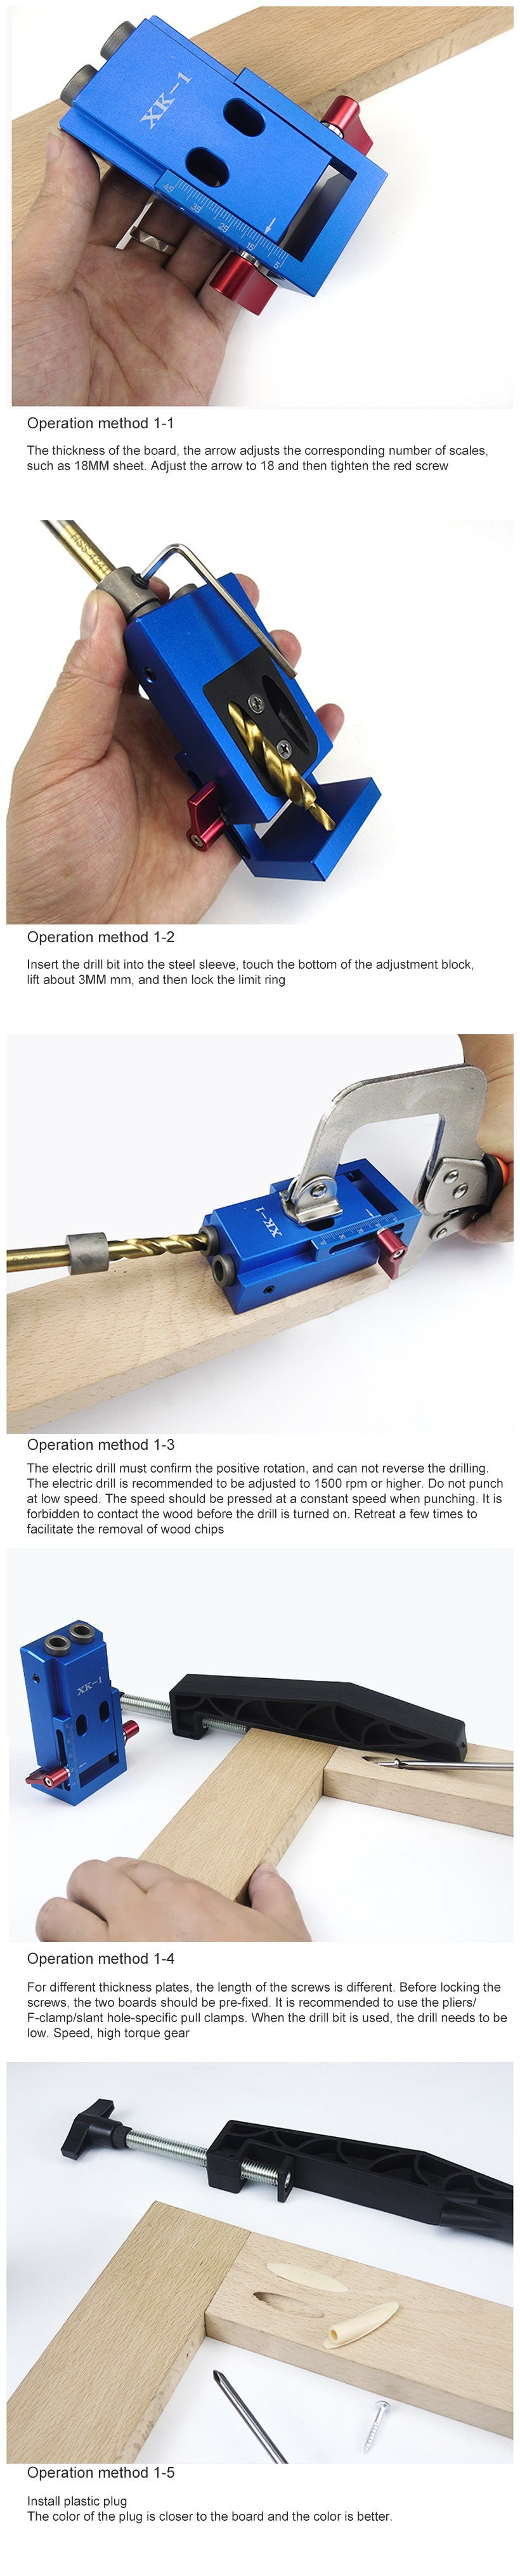 Upgrade-XK-2-Pocket-Hole-Jig-Wood-Toggle-Clamps-with-Drilling-Bit-Hole-Puncher-Locator-Working-Carpe-1730565-11